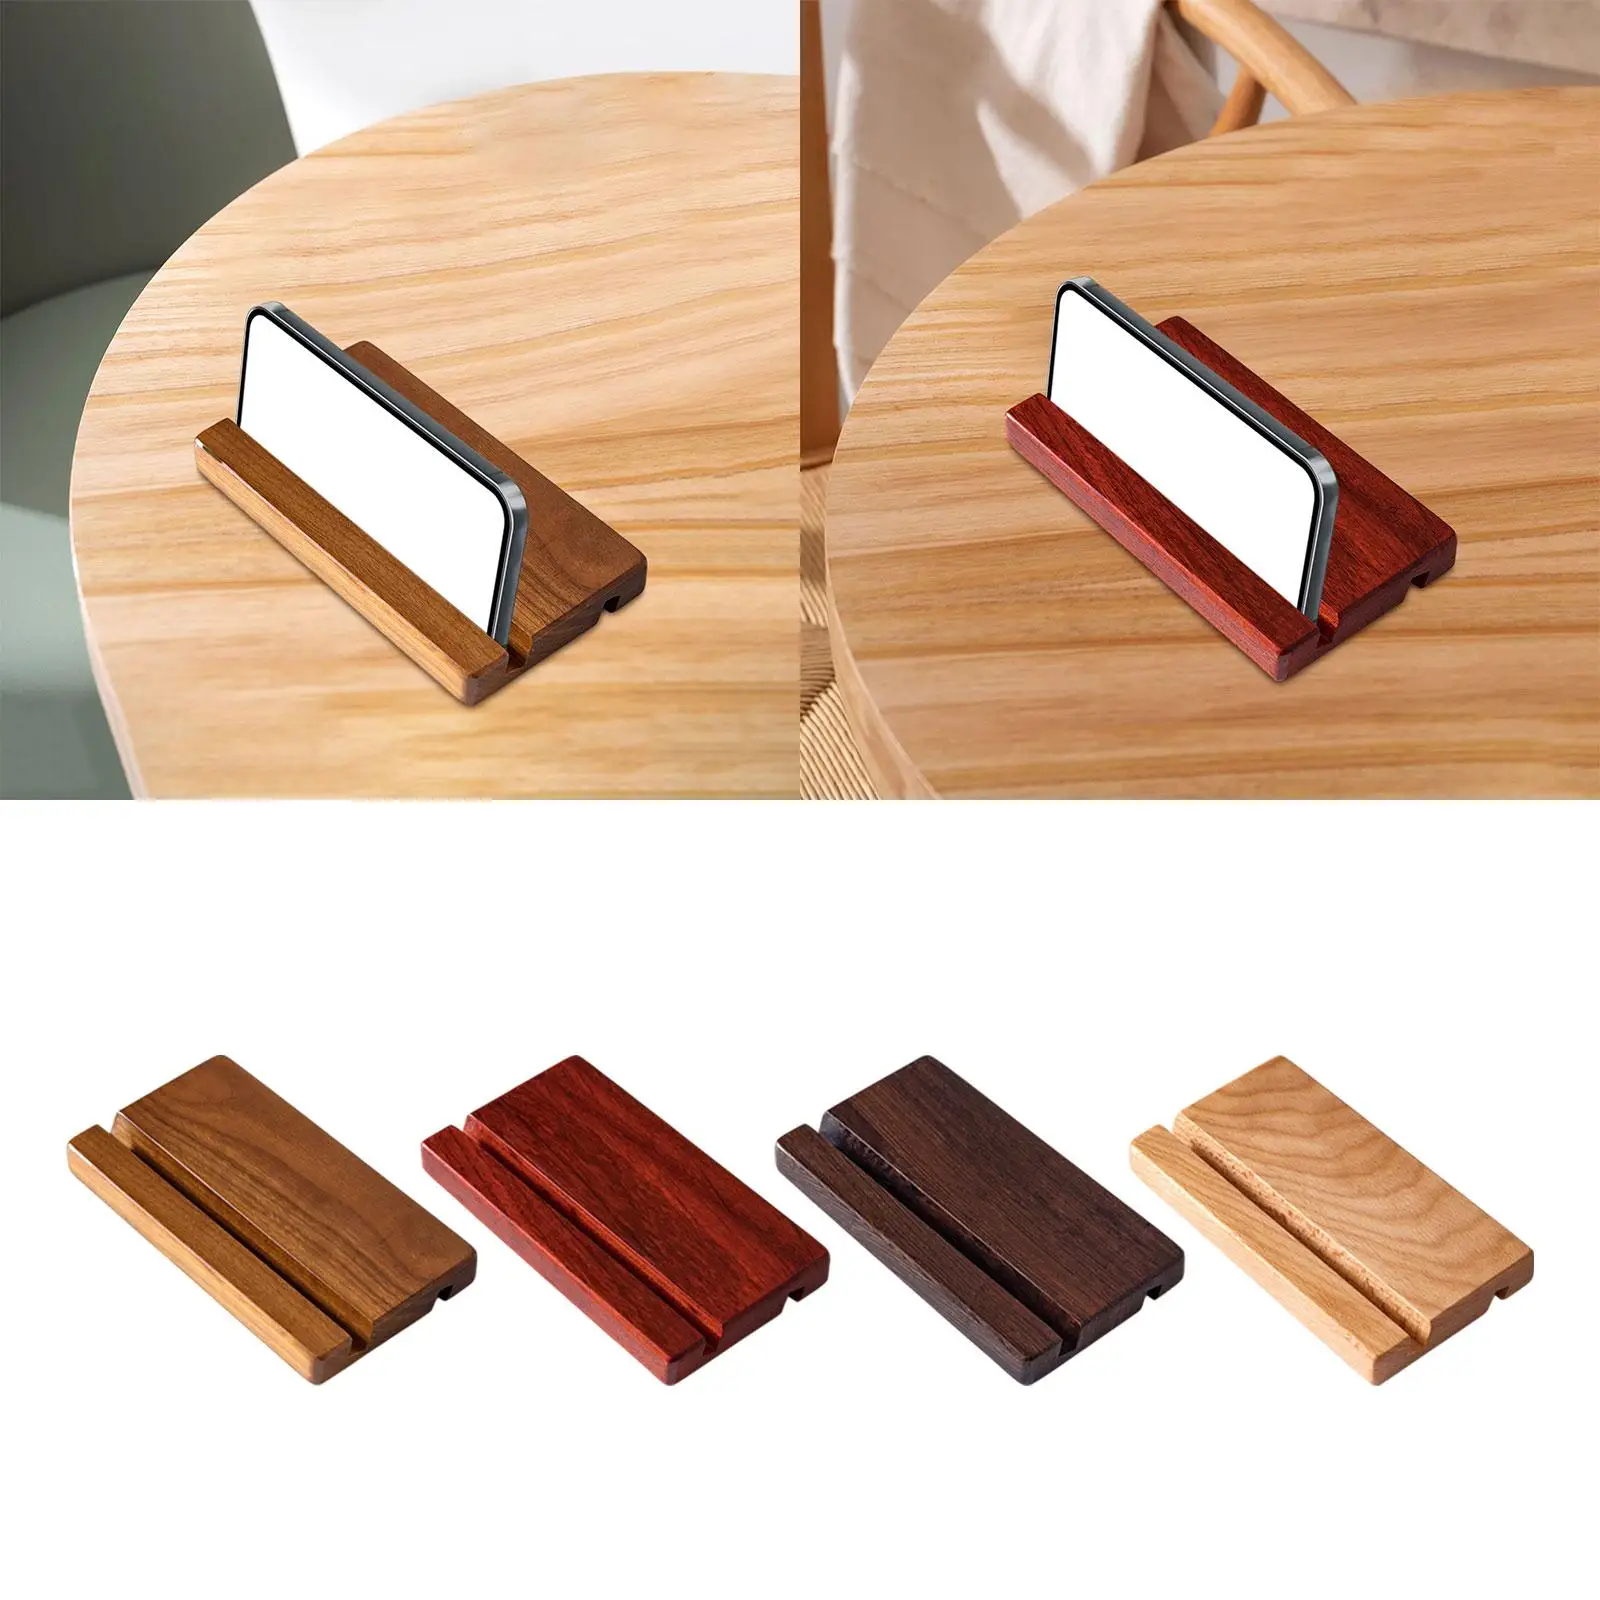 Wood Phone Holder Dual Slots Display Stand Office Desk Accessories Easy to Use Phone Bracket Phone Support for Phones E Readers